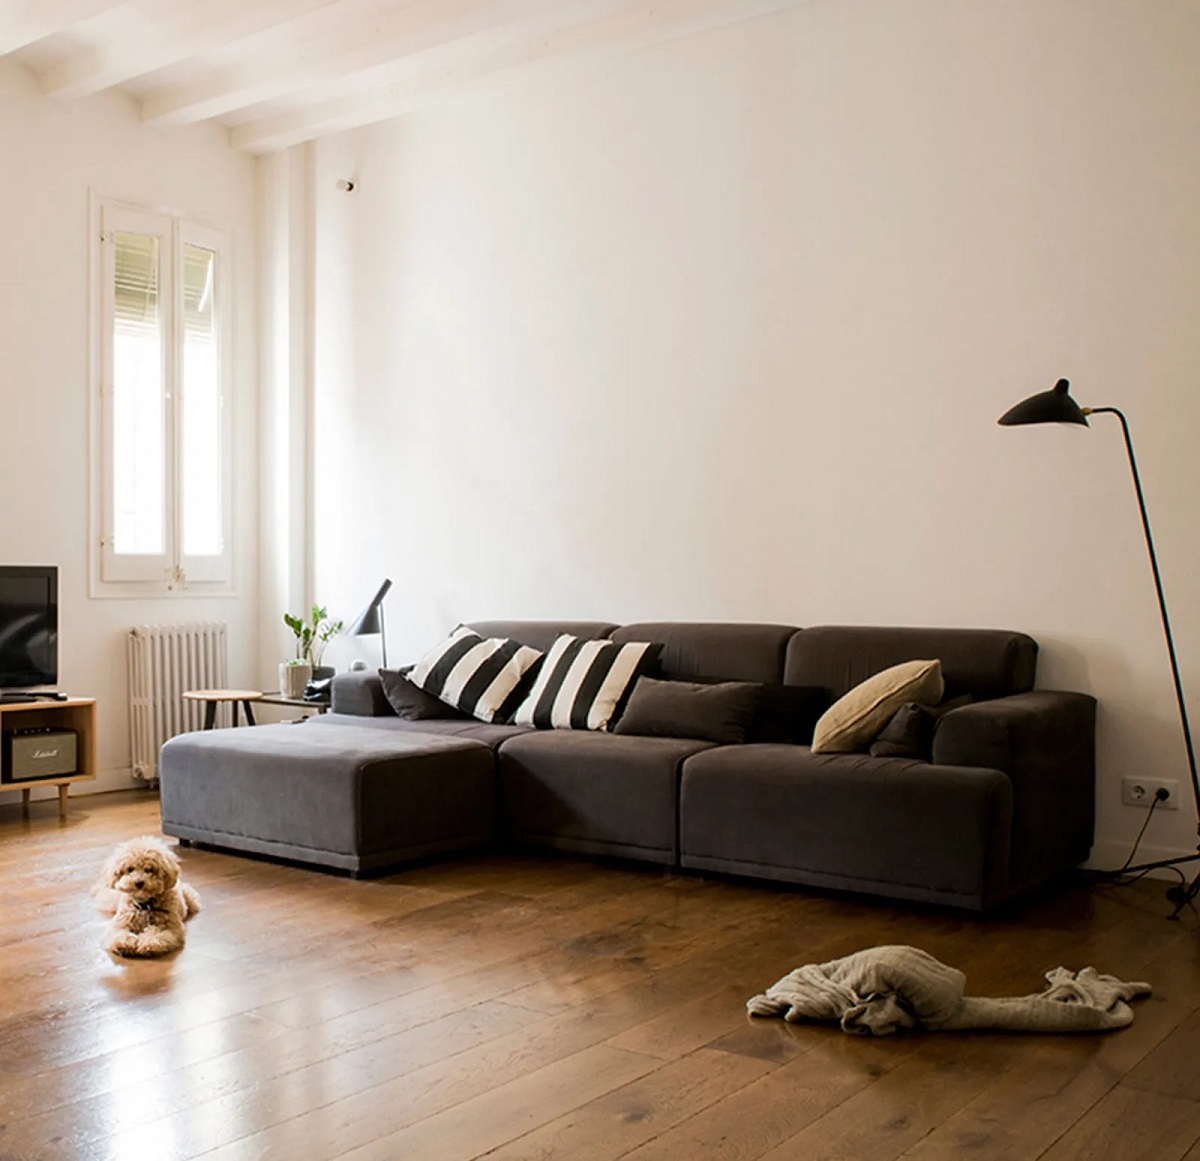 Sofa Arranging Mistakes: 7 Layouts To Avoid In A Living Room